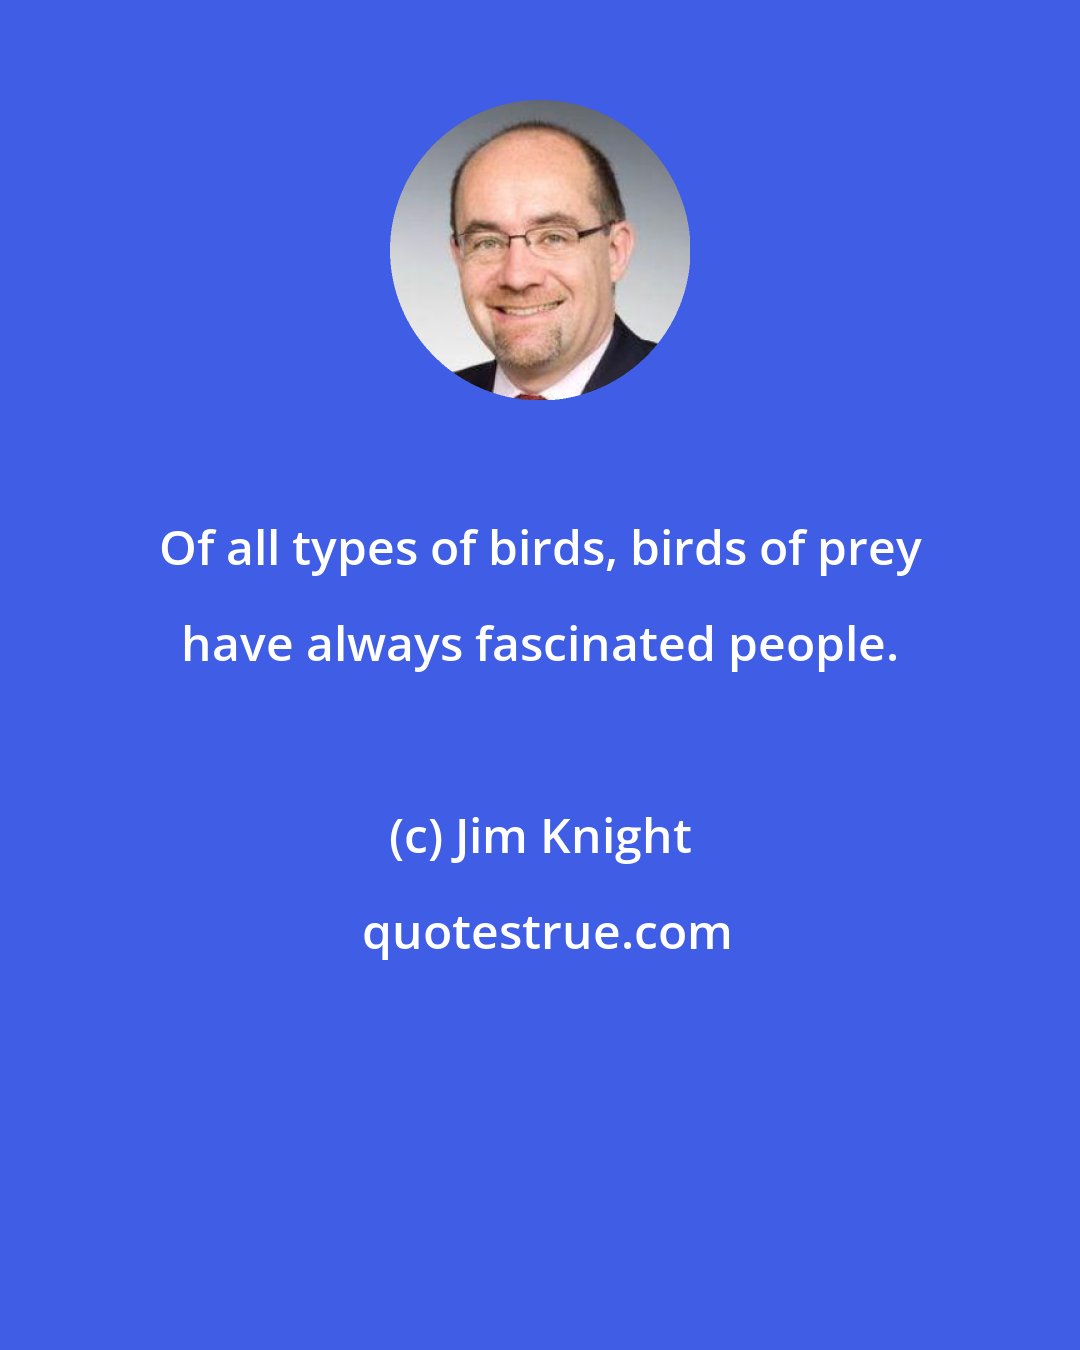 Jim Knight: Of all types of birds, birds of prey have always fascinated people.